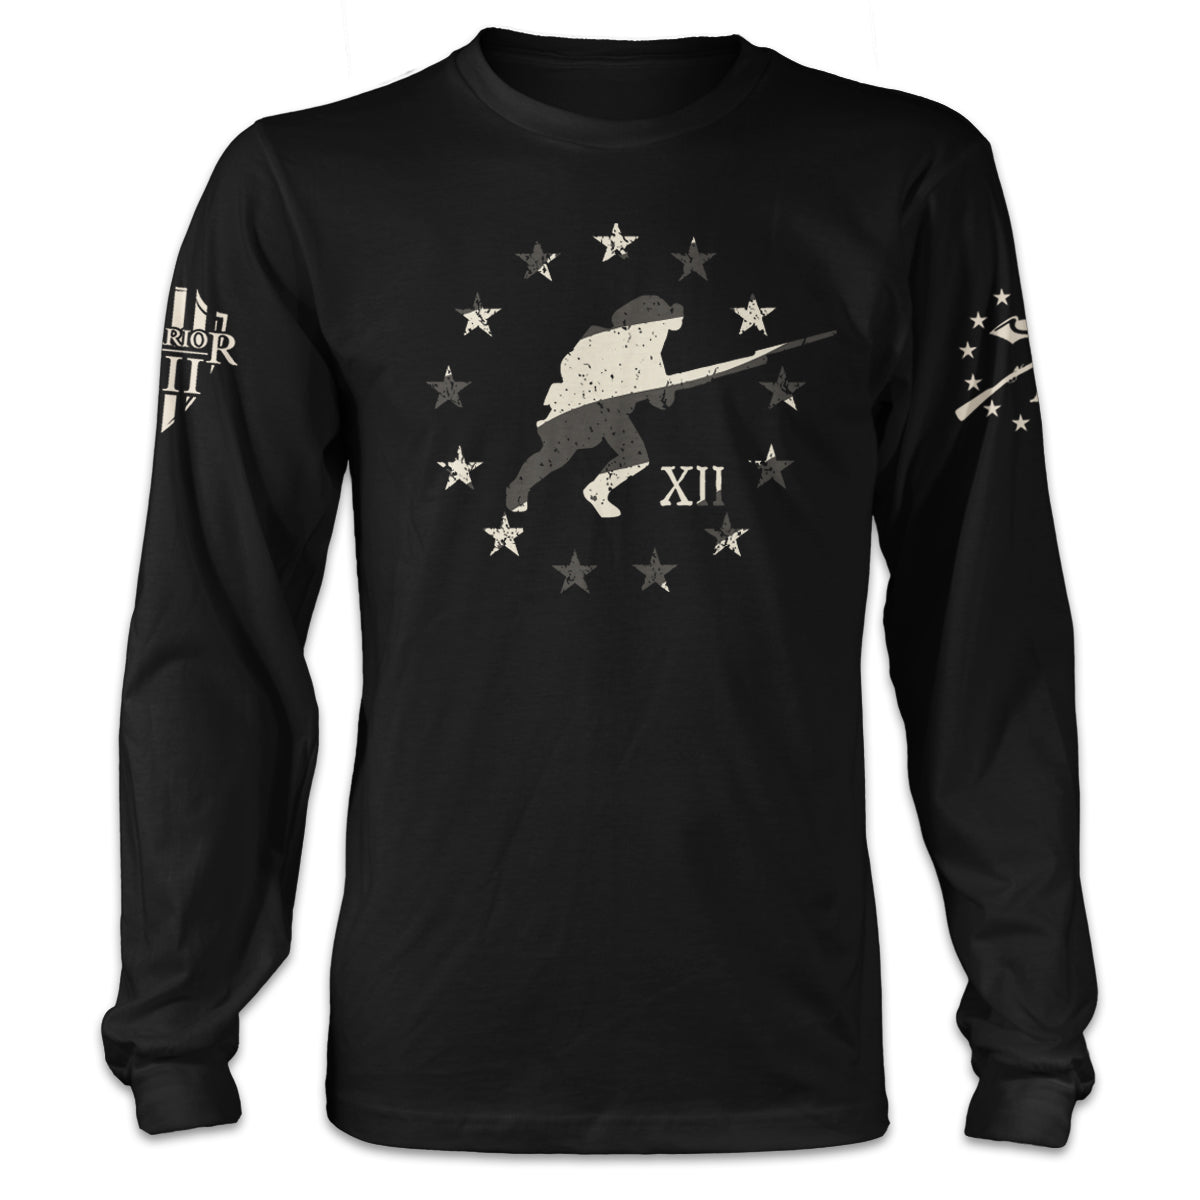 A black long sleeve shirt with a soldier running with stars around him in a circle printed on the front of the shirt.